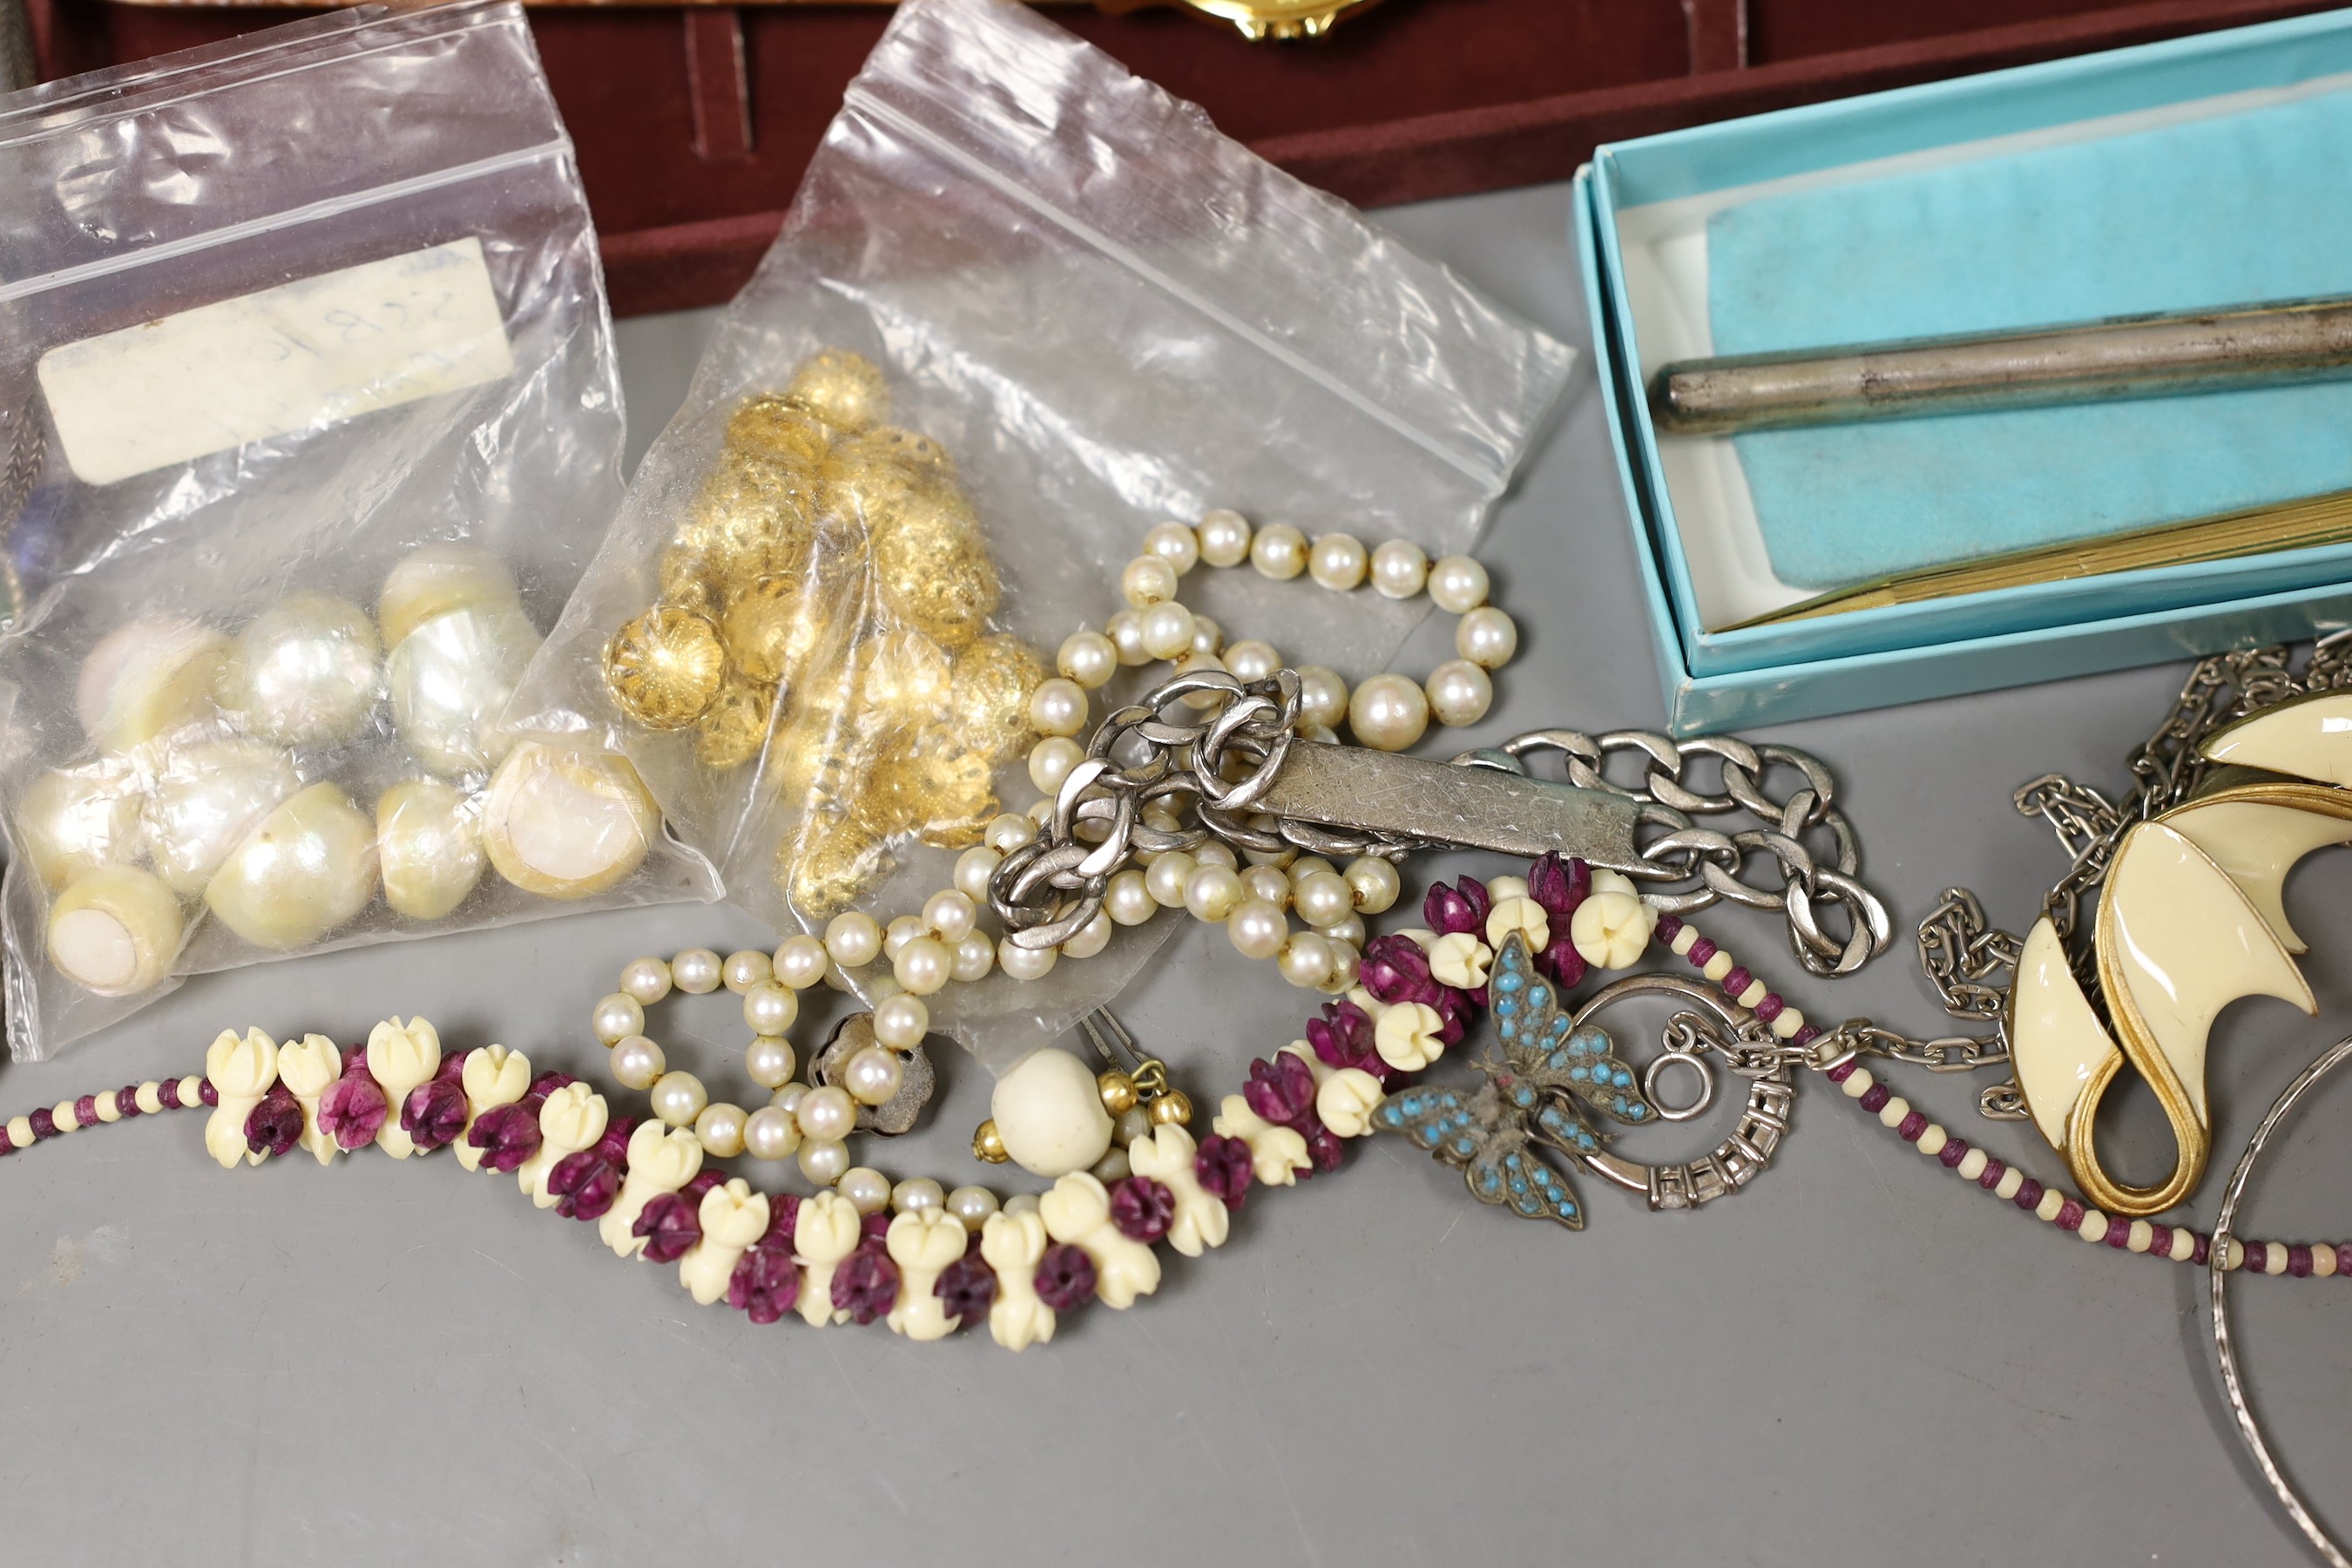 Mixed costume jewellery including filigree bracelet, bangles etc. and other items including two pens and a fob watch.